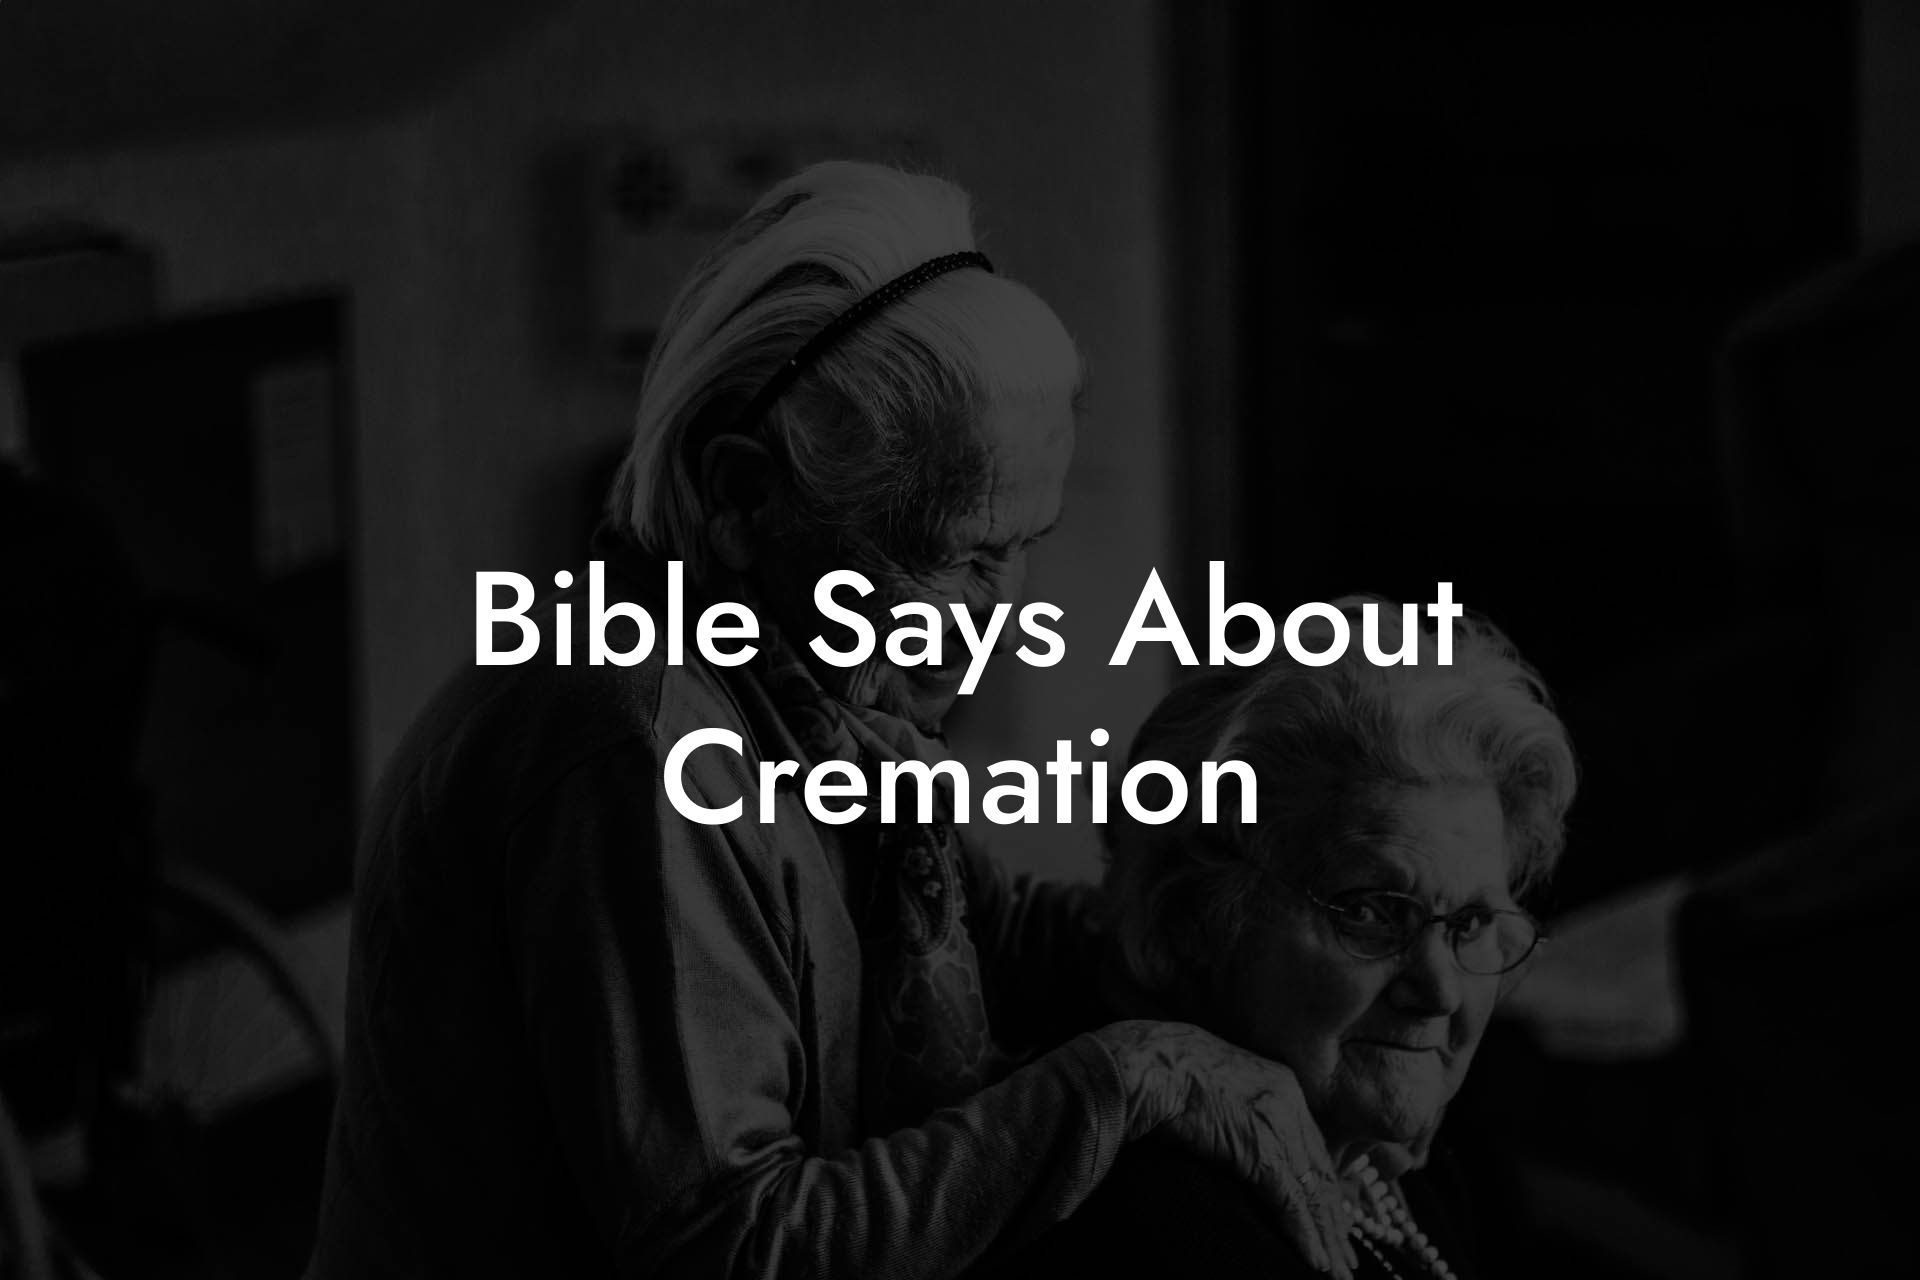 Bible Says About Cremation